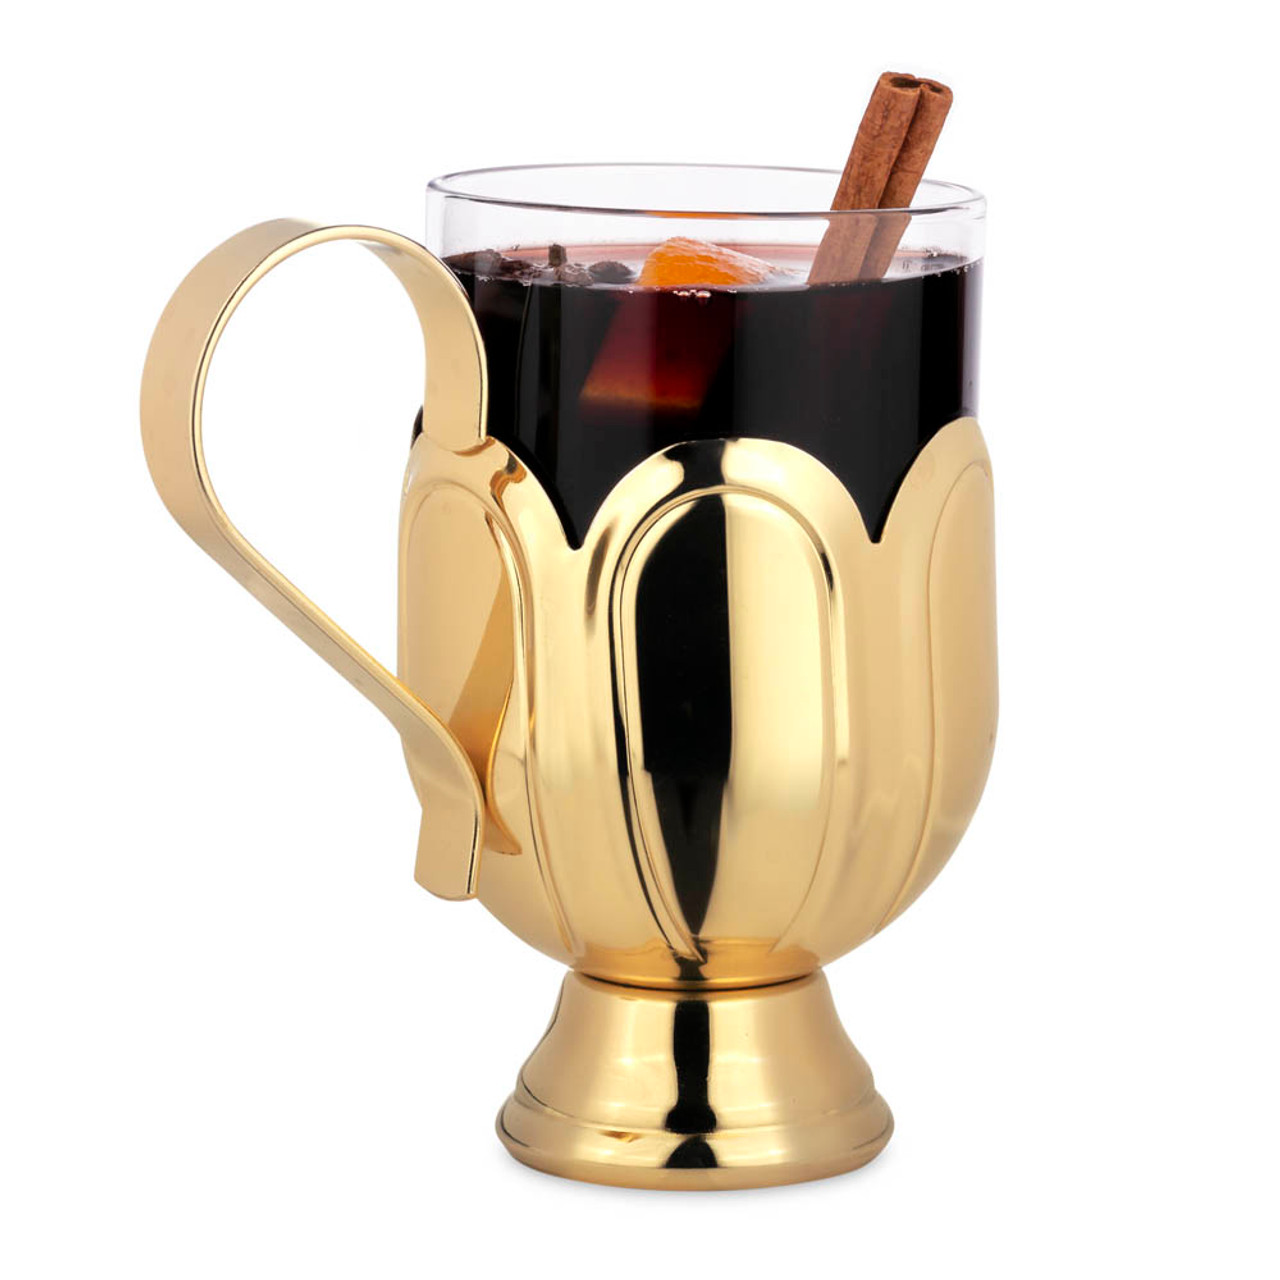 https://cdn11.bigcommerce.com/s-cznxq08r7/images/stencil/1280x1280/products/1667/957/7662-mulled_wine_cider_mug_-_glass_stainless_steel_with_gold_finish_-_12_oz-2__19888.1590764746.jpg?c=1